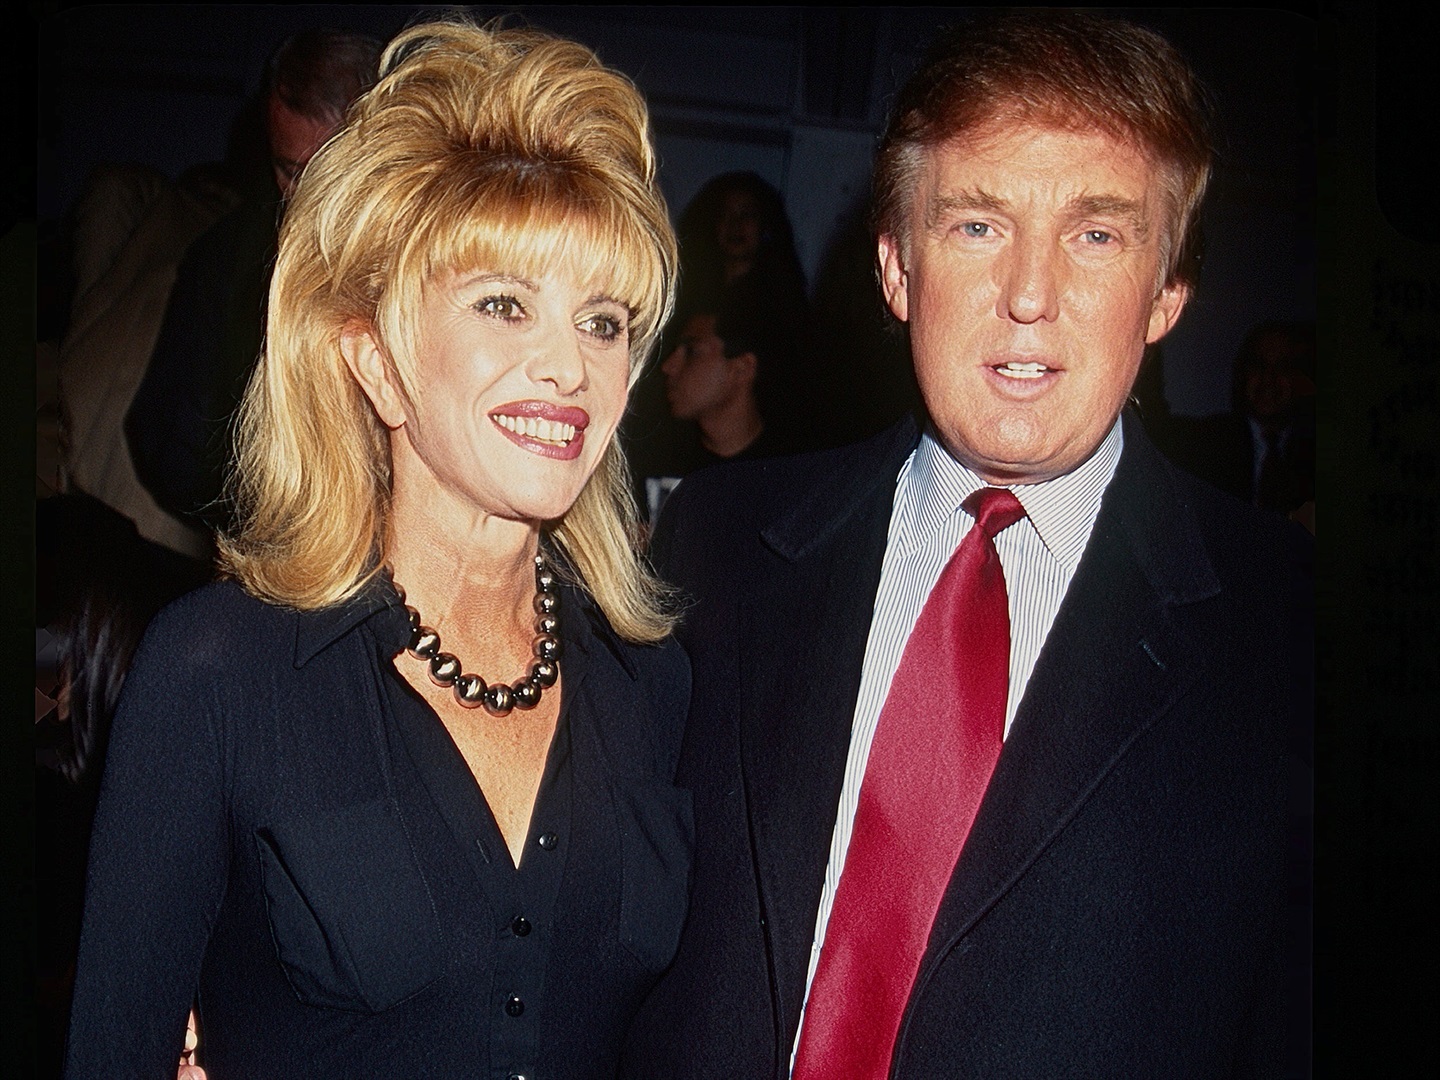 Ivana Trump and Donald Trump at a Betsey Johnson fashion show in New York City in 1997, five years after their divorce.